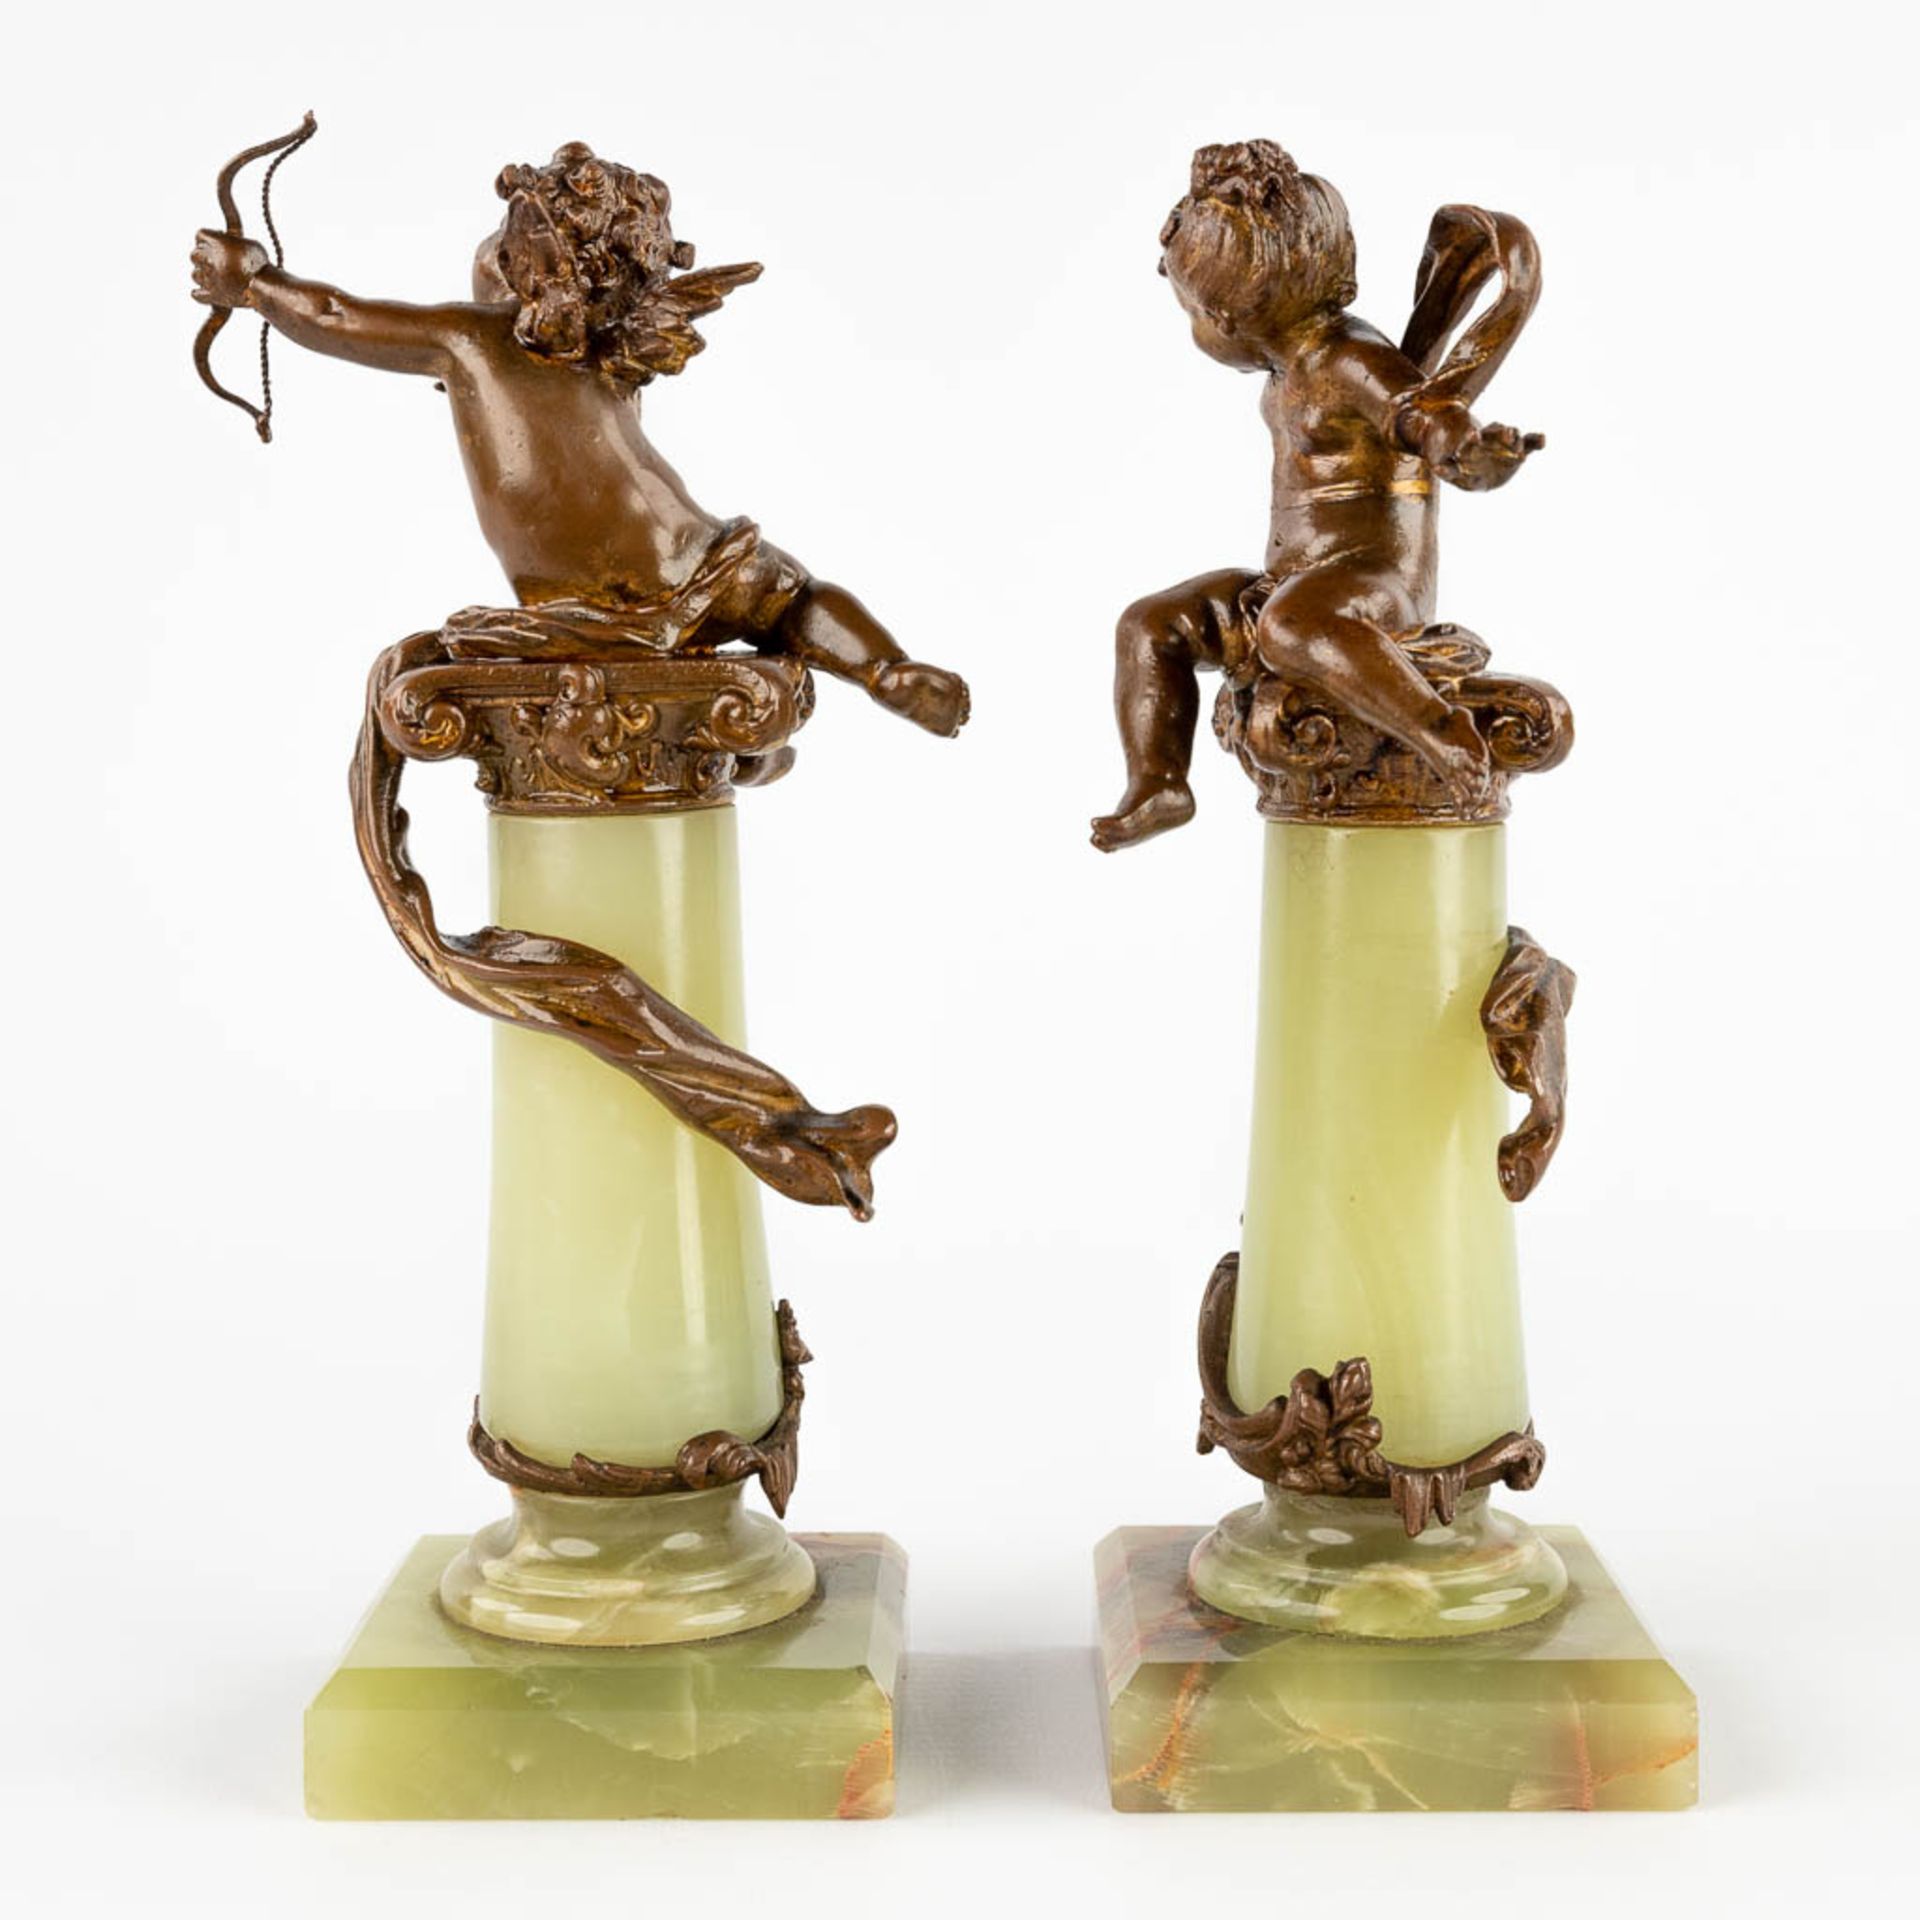 A pair of putti on a pedestal, spelter and onyx in Louis XV style. 19th C. (D:8 x W:8 x H:23 cm) - Image 5 of 11